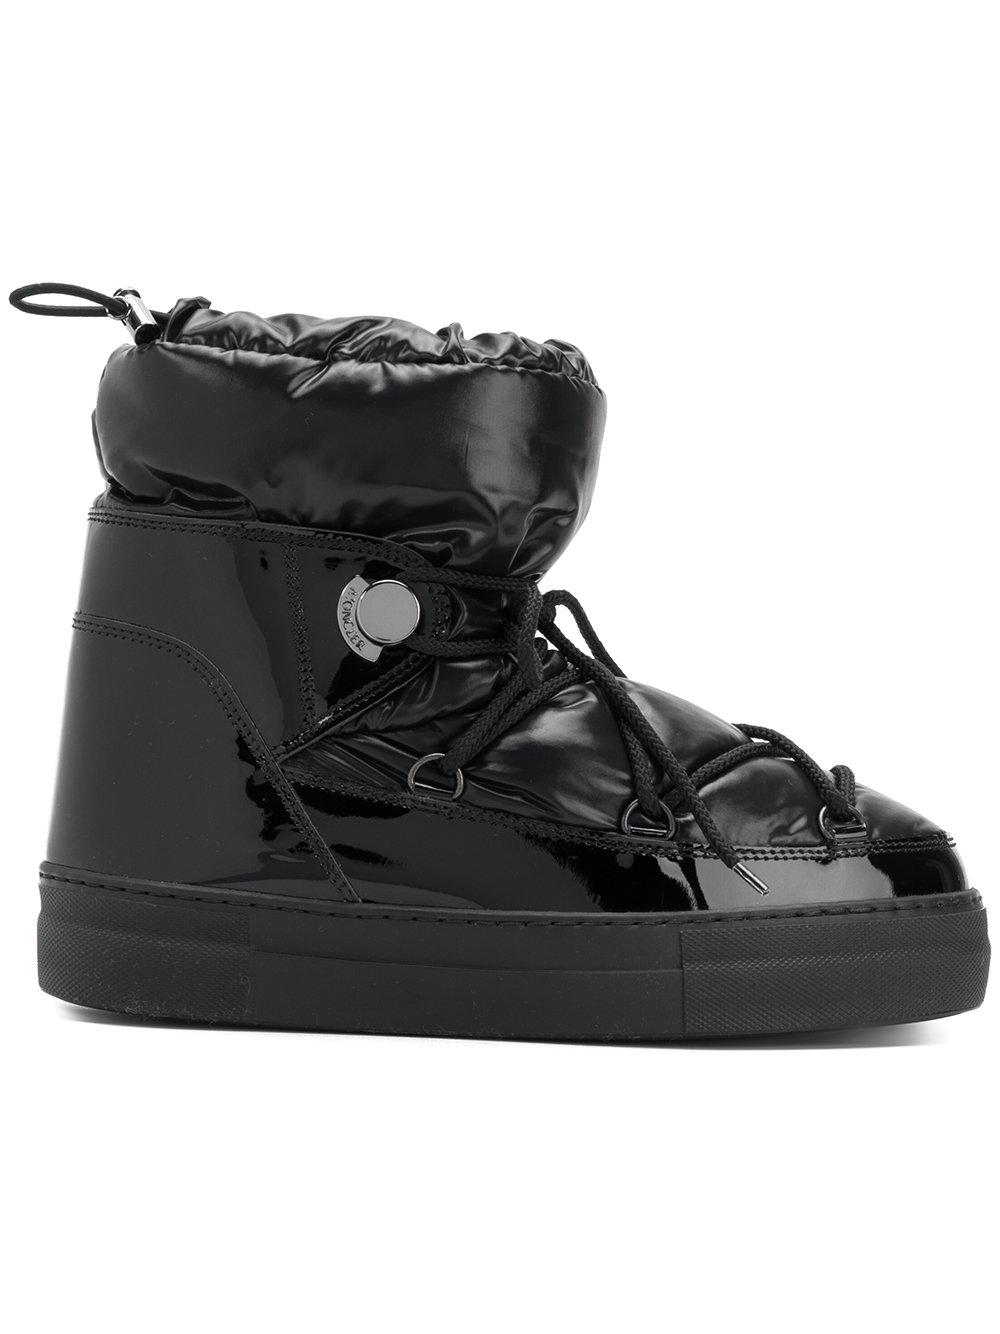 Moncler Leather Padded Snow Boots in Black | Lyst